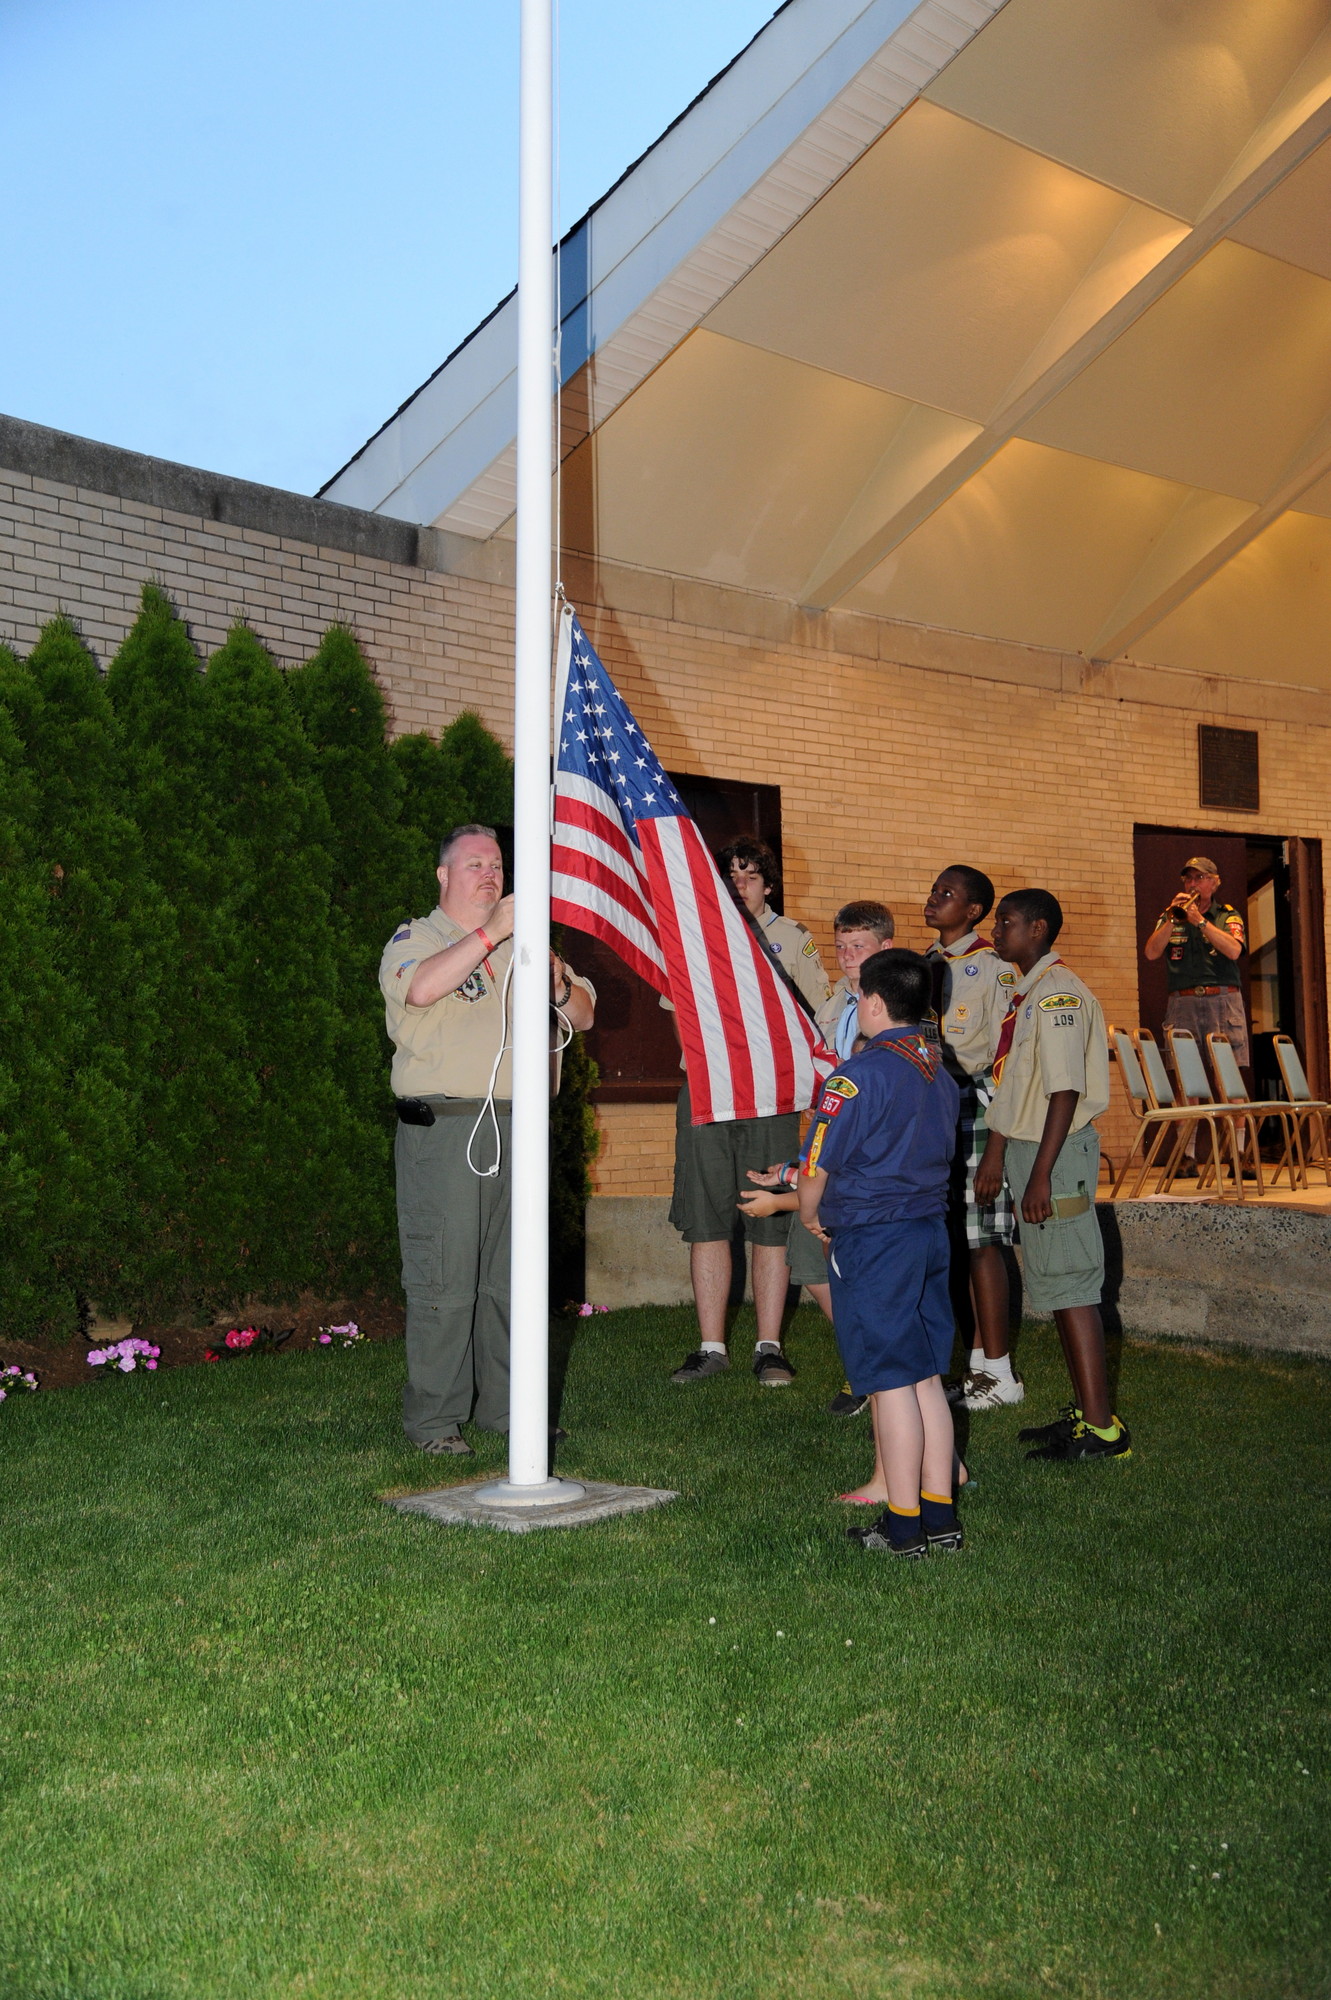 Pack 367 leader Patrick Burke was joined by Valley Stream Cub Scouts and Boy Scouts in retiring the colors last Saturday night during the 33rd annual Scout Camporee on the Village Green.